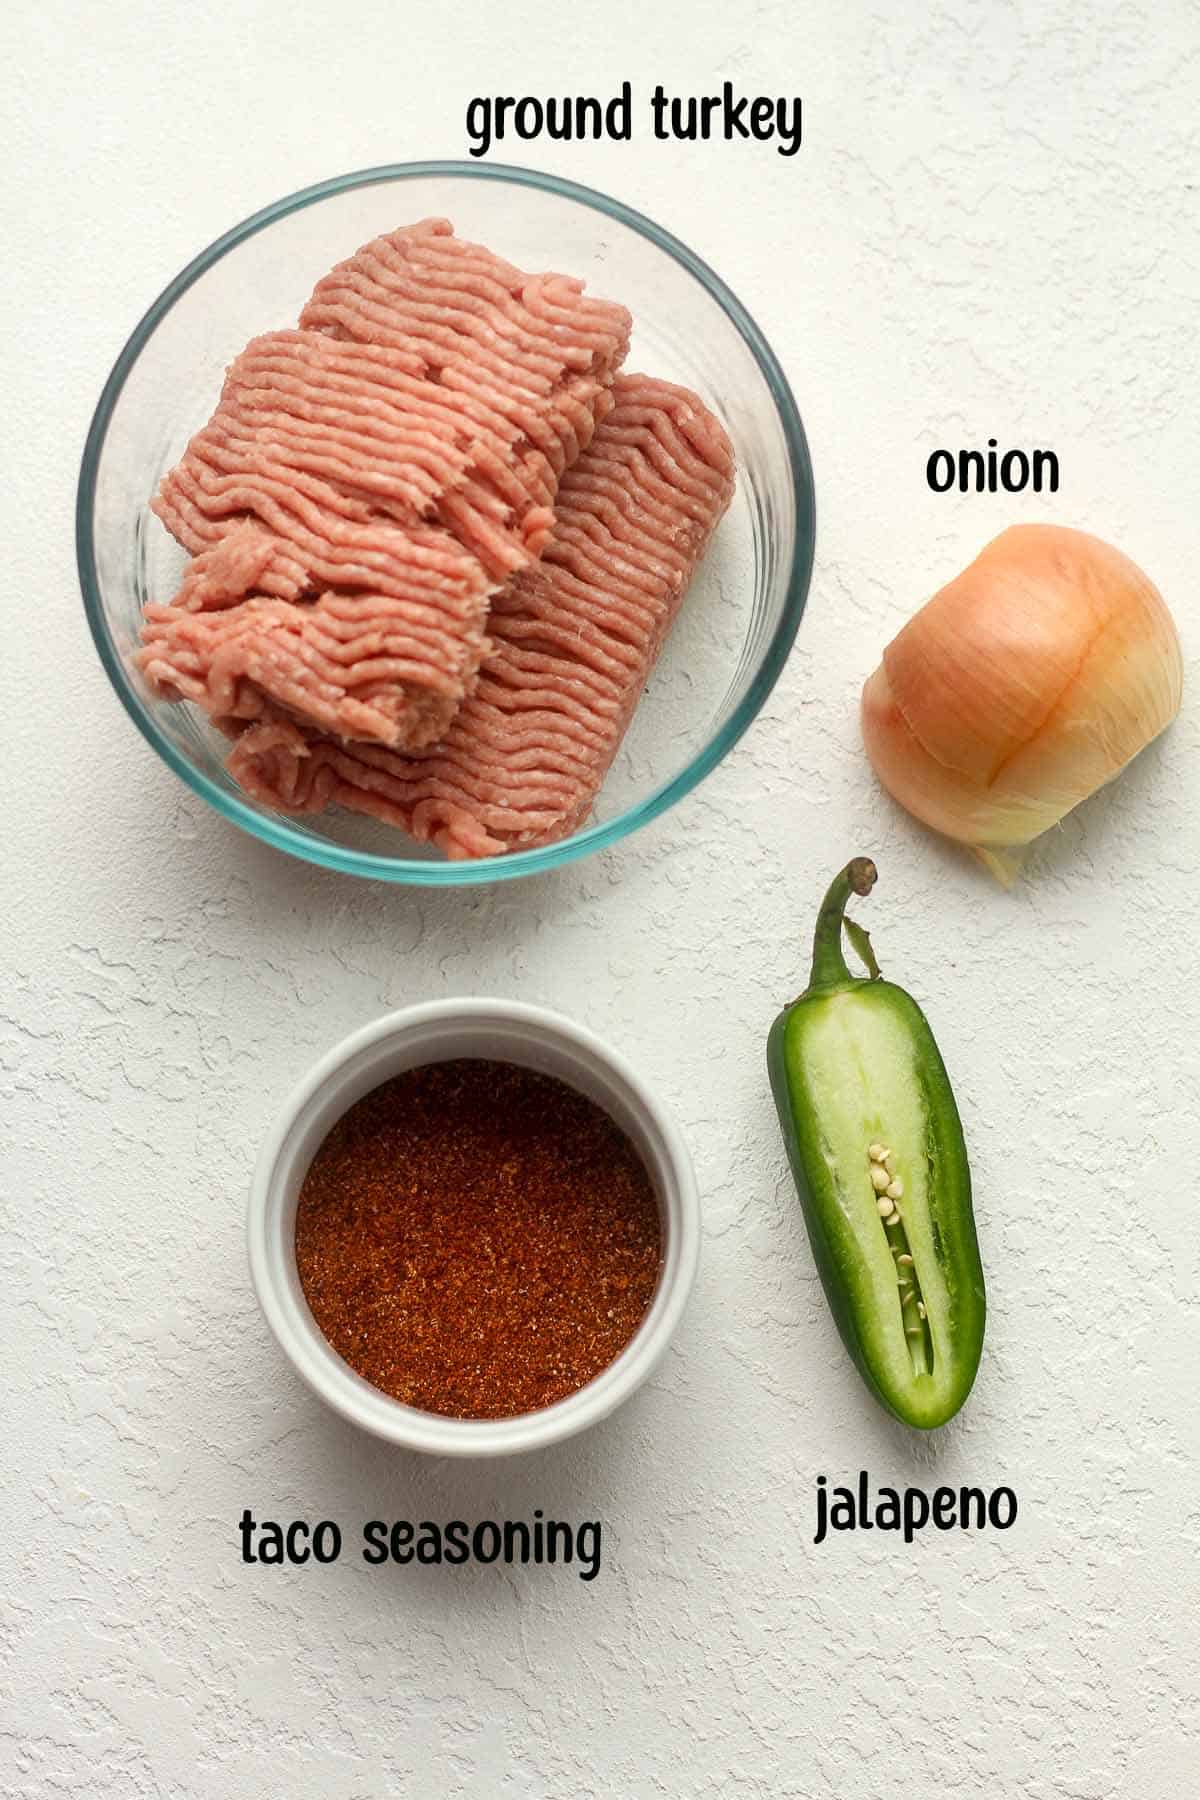 The ingredients for the taco meat.